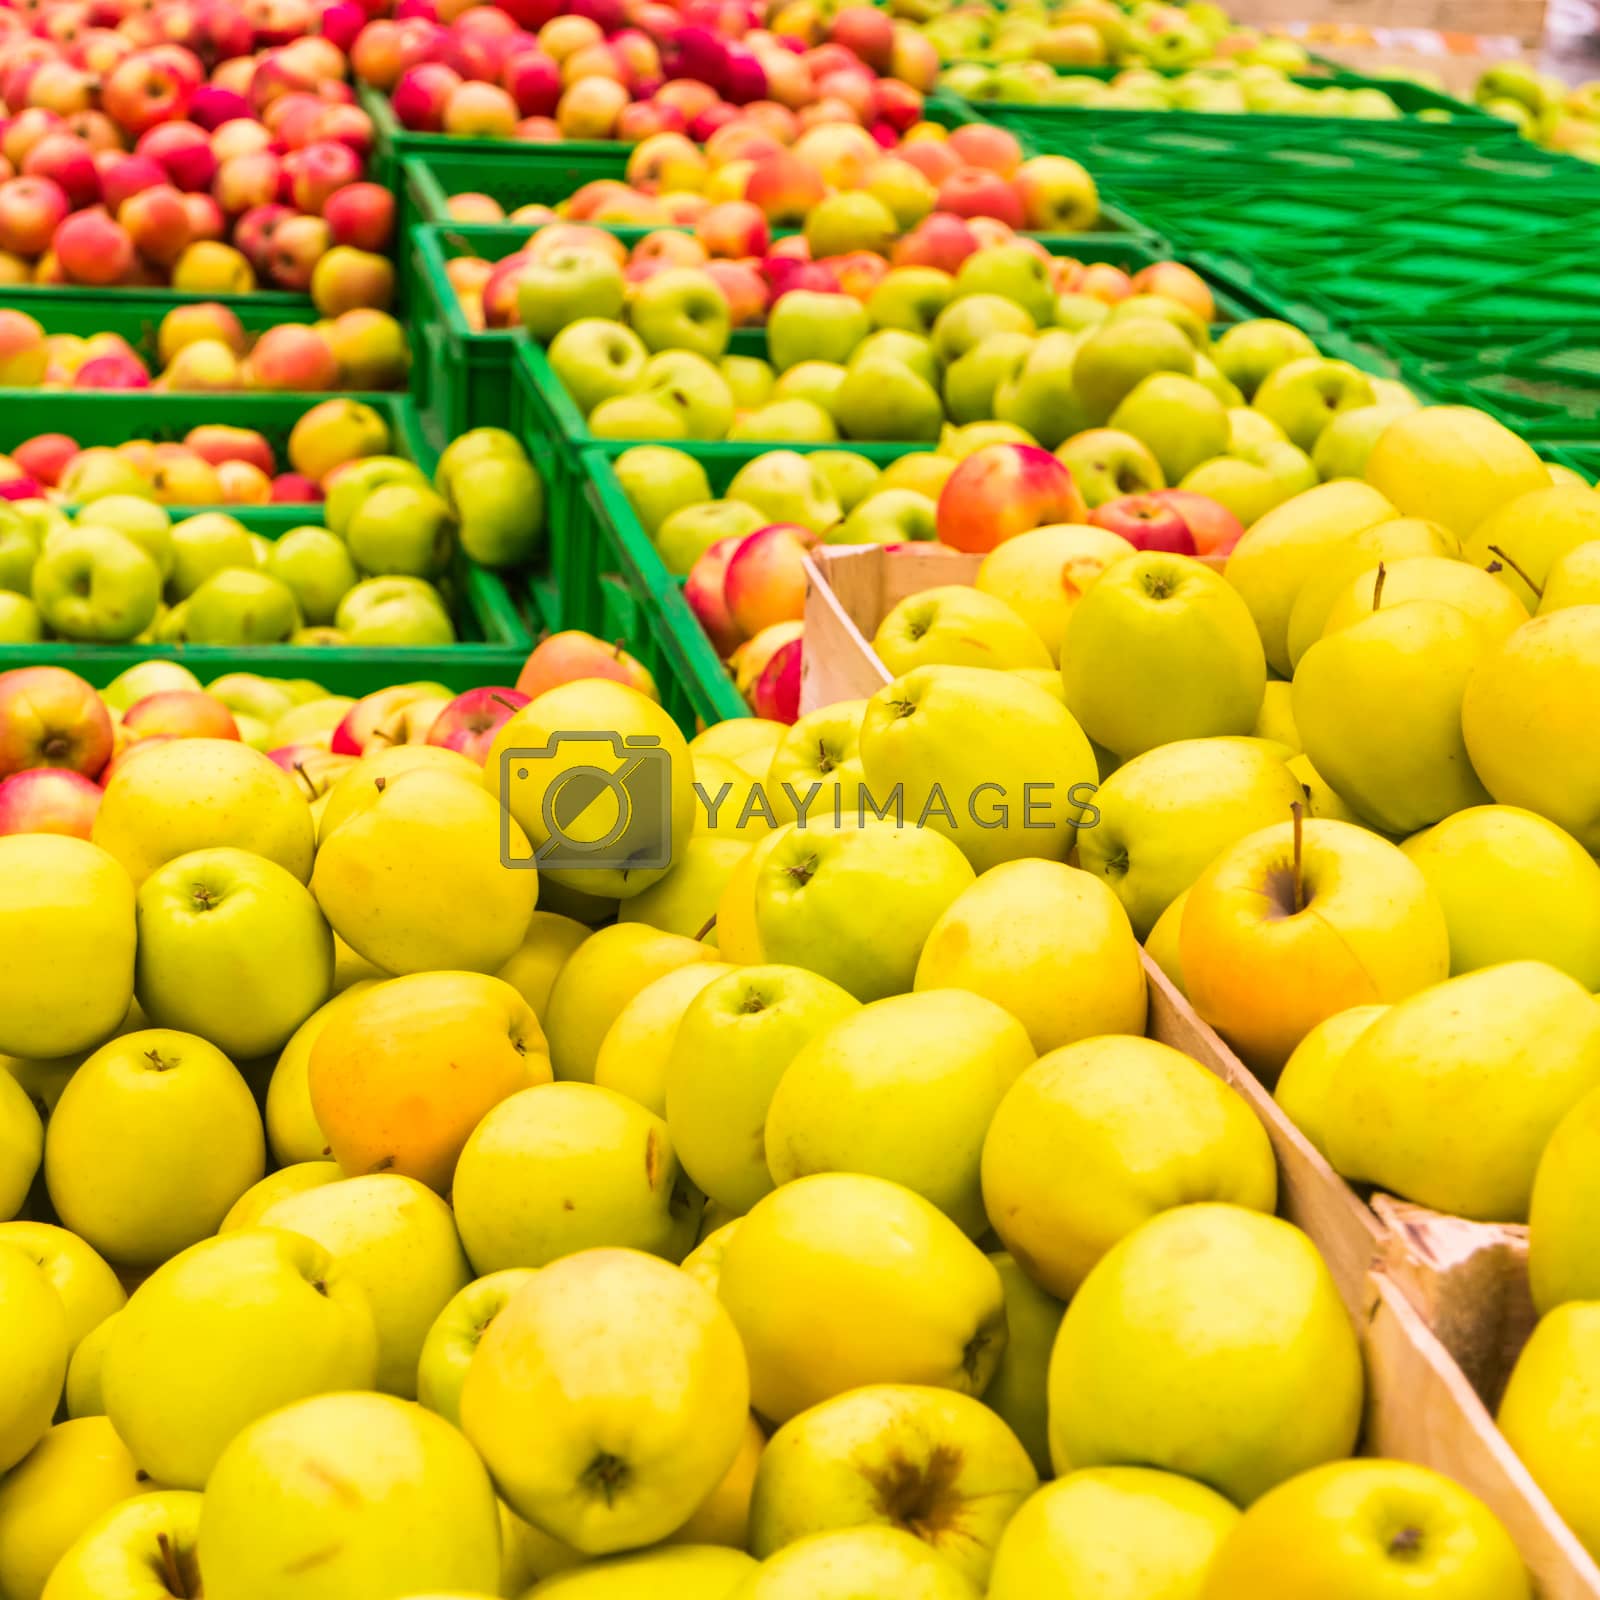 Royalty free image of Red and yellow fresh apples by vapi